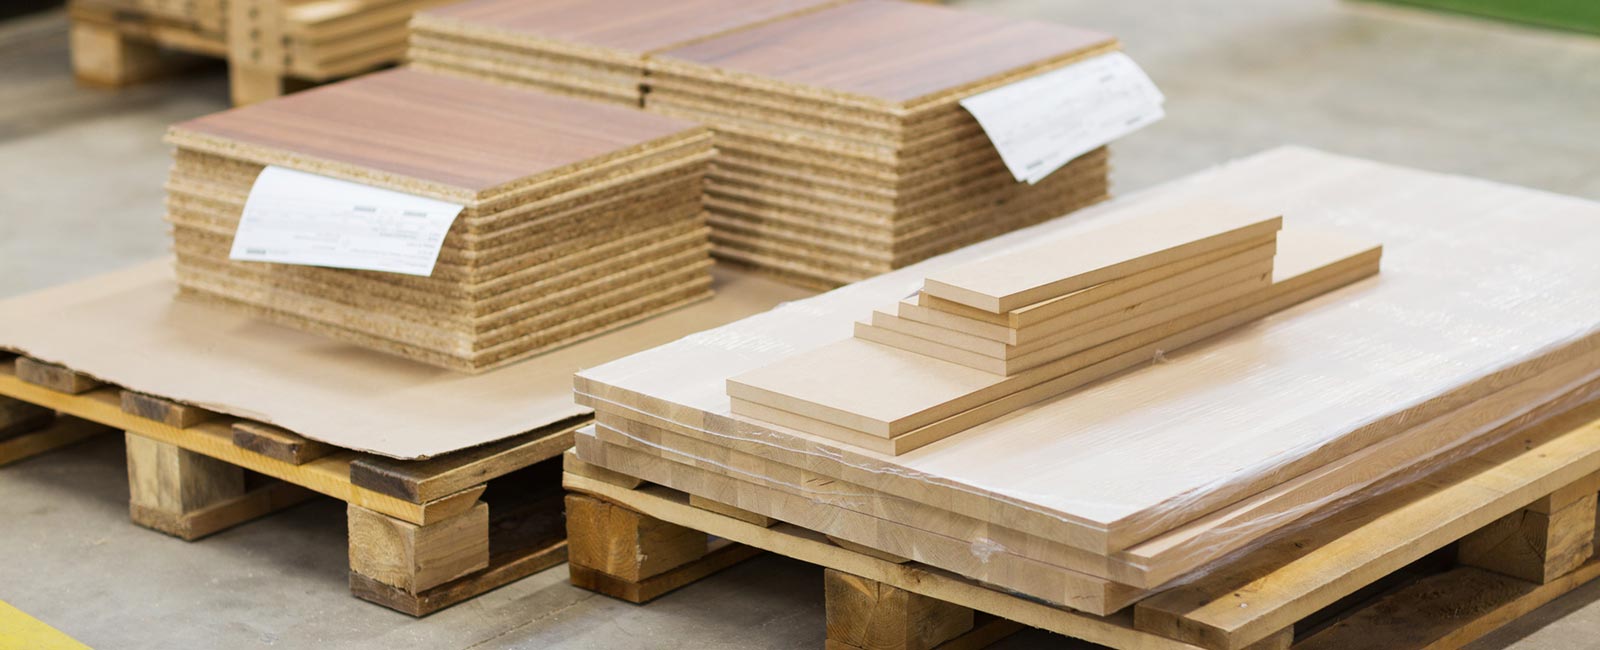 Mdf Vs Plywood Which One Should You Use For Your Next Project